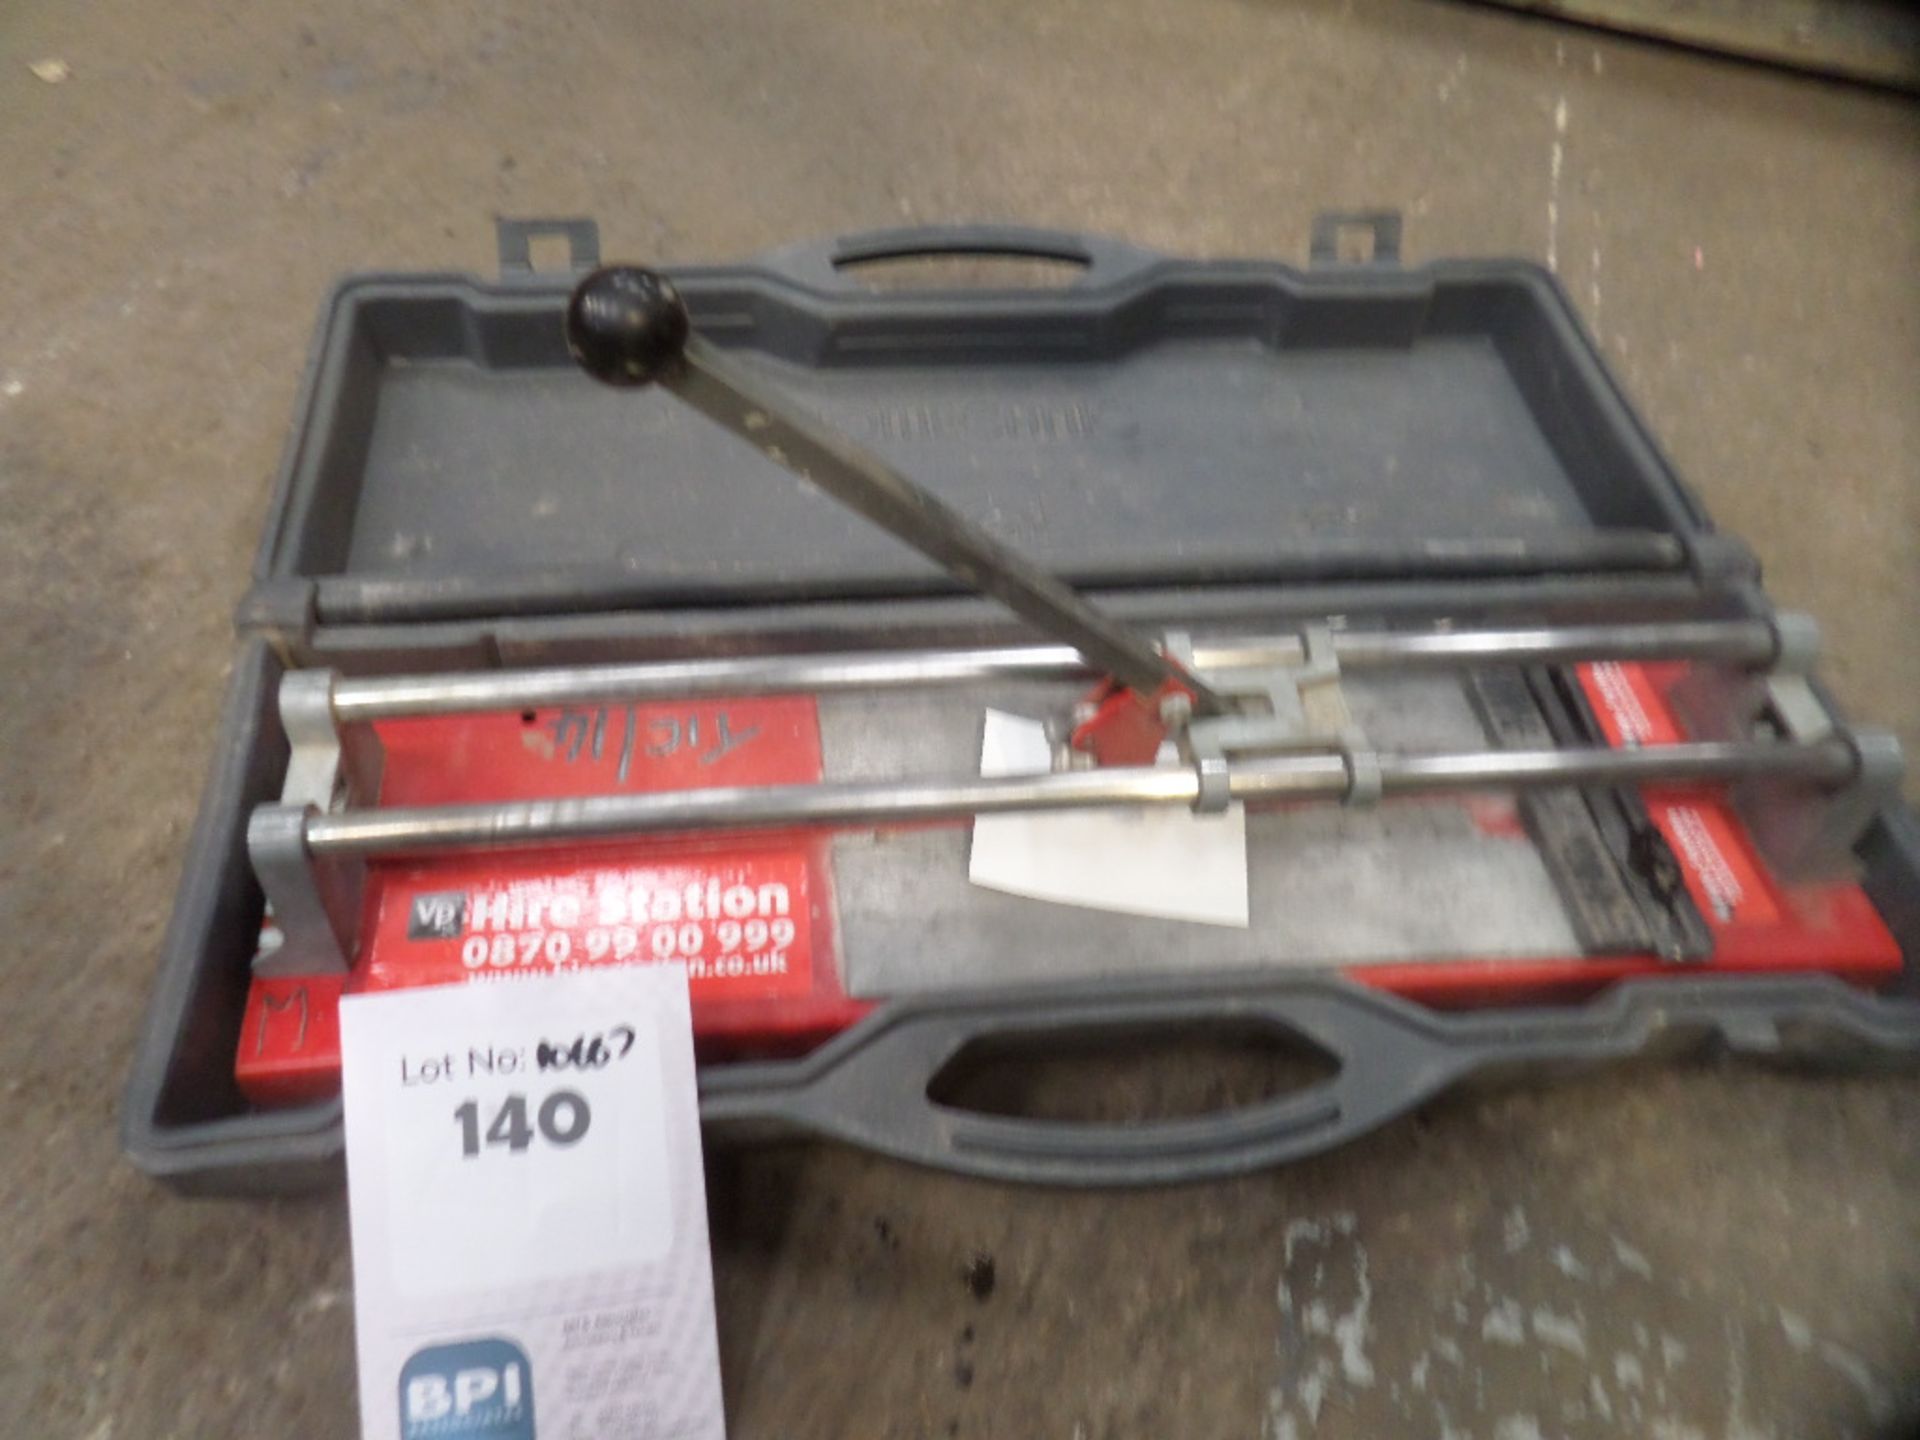 TOMECANIE  {027297} MANUAL TILE CUTTER Comes in original case and appears to work fine.